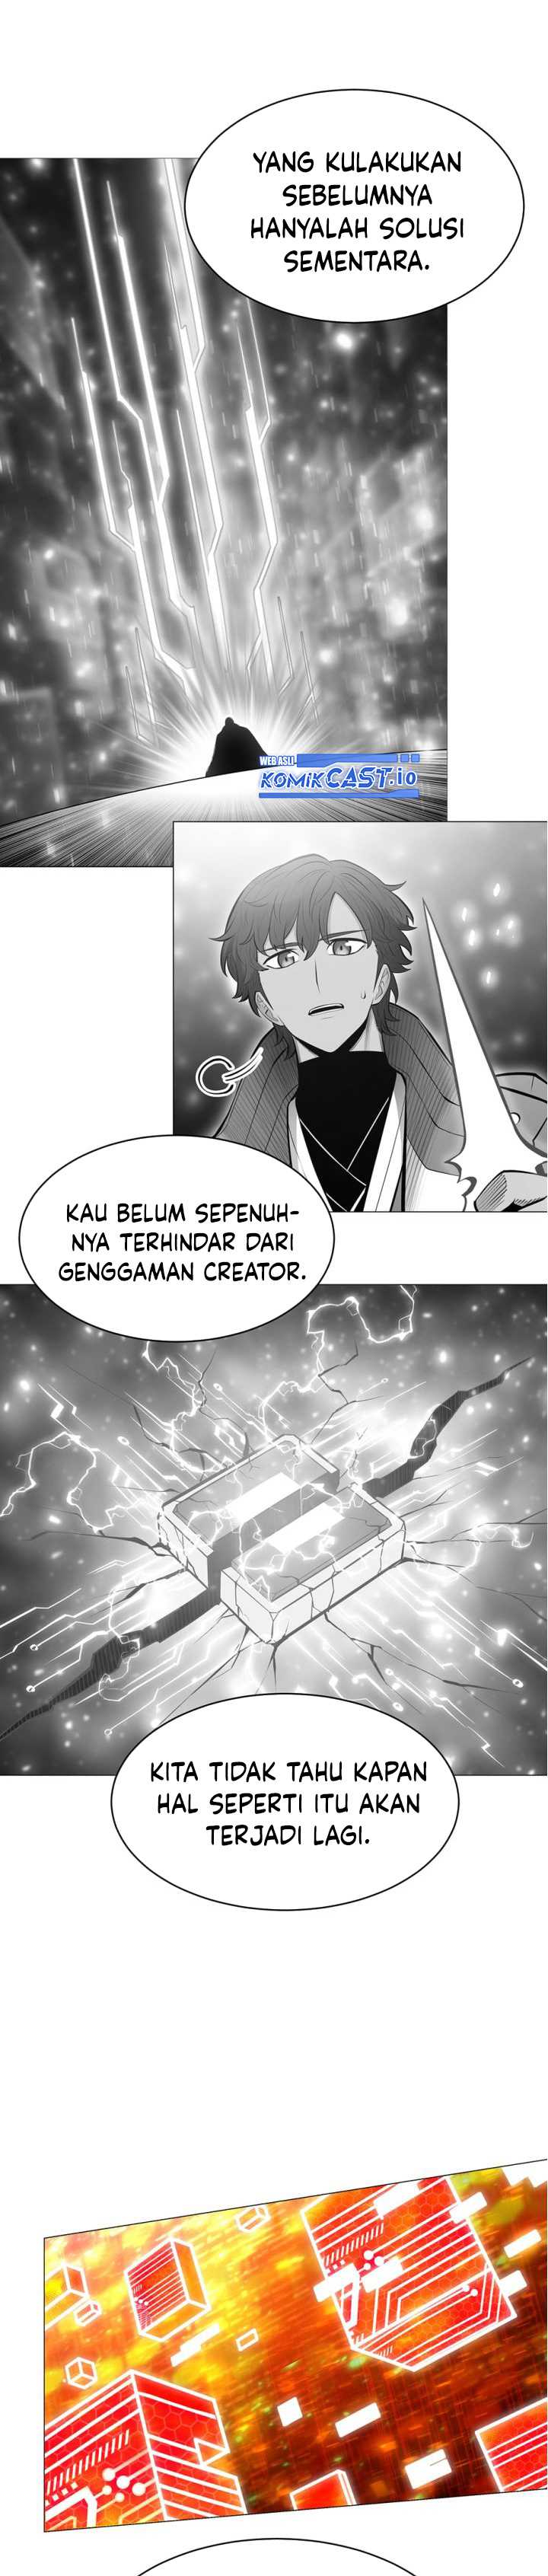 Updater Chapter 110